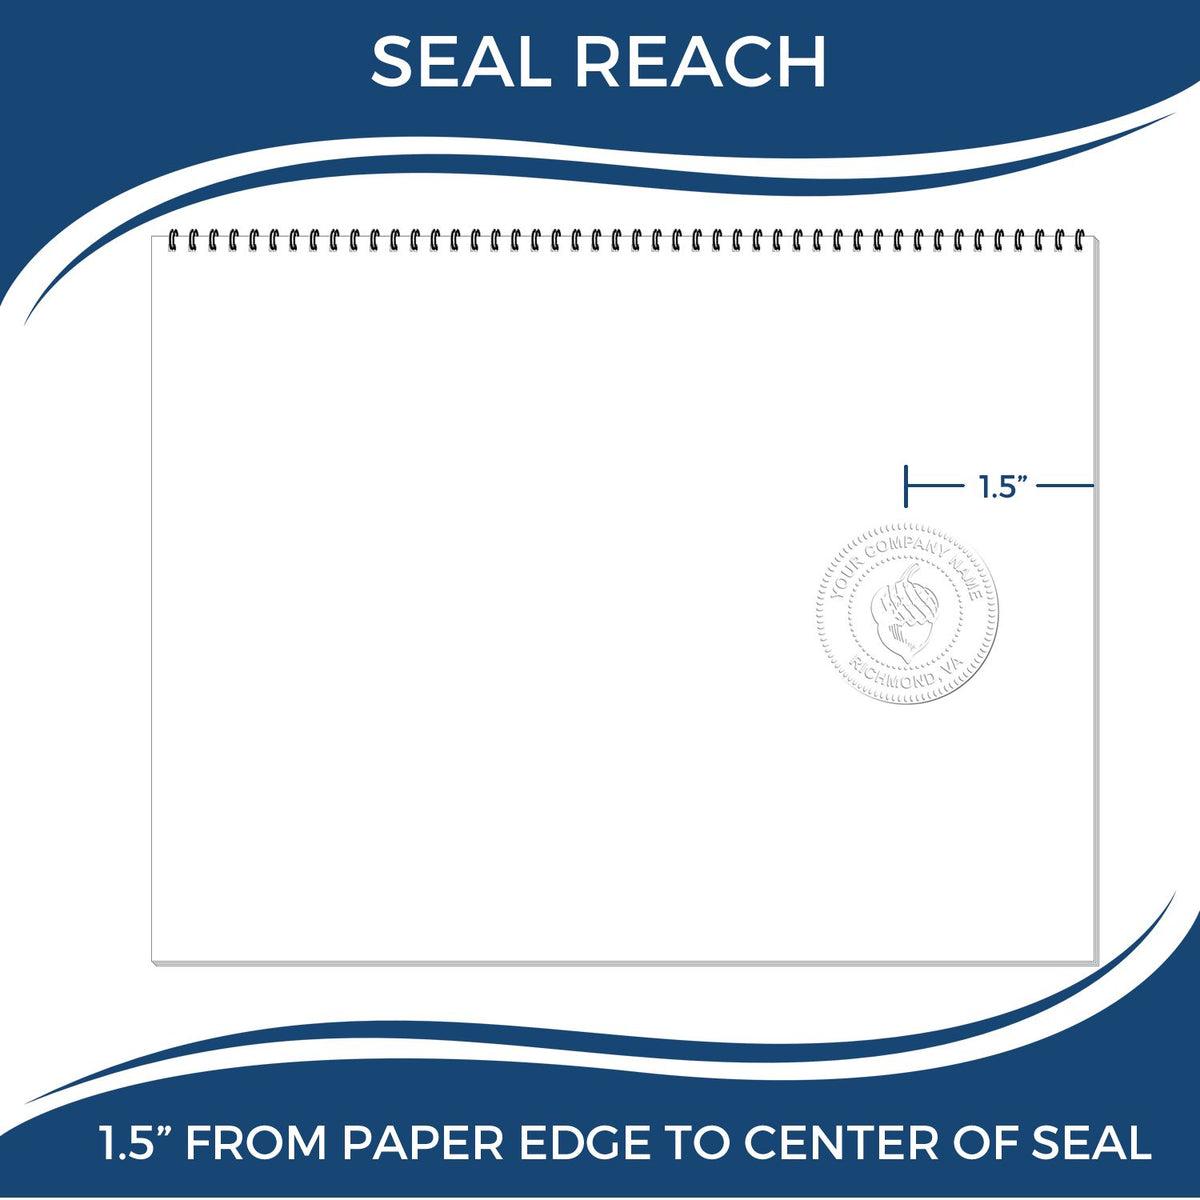 An infographic showing the seal reach which is represented by a ruler and a miniature seal image of the Gift Maine Geologist Seal